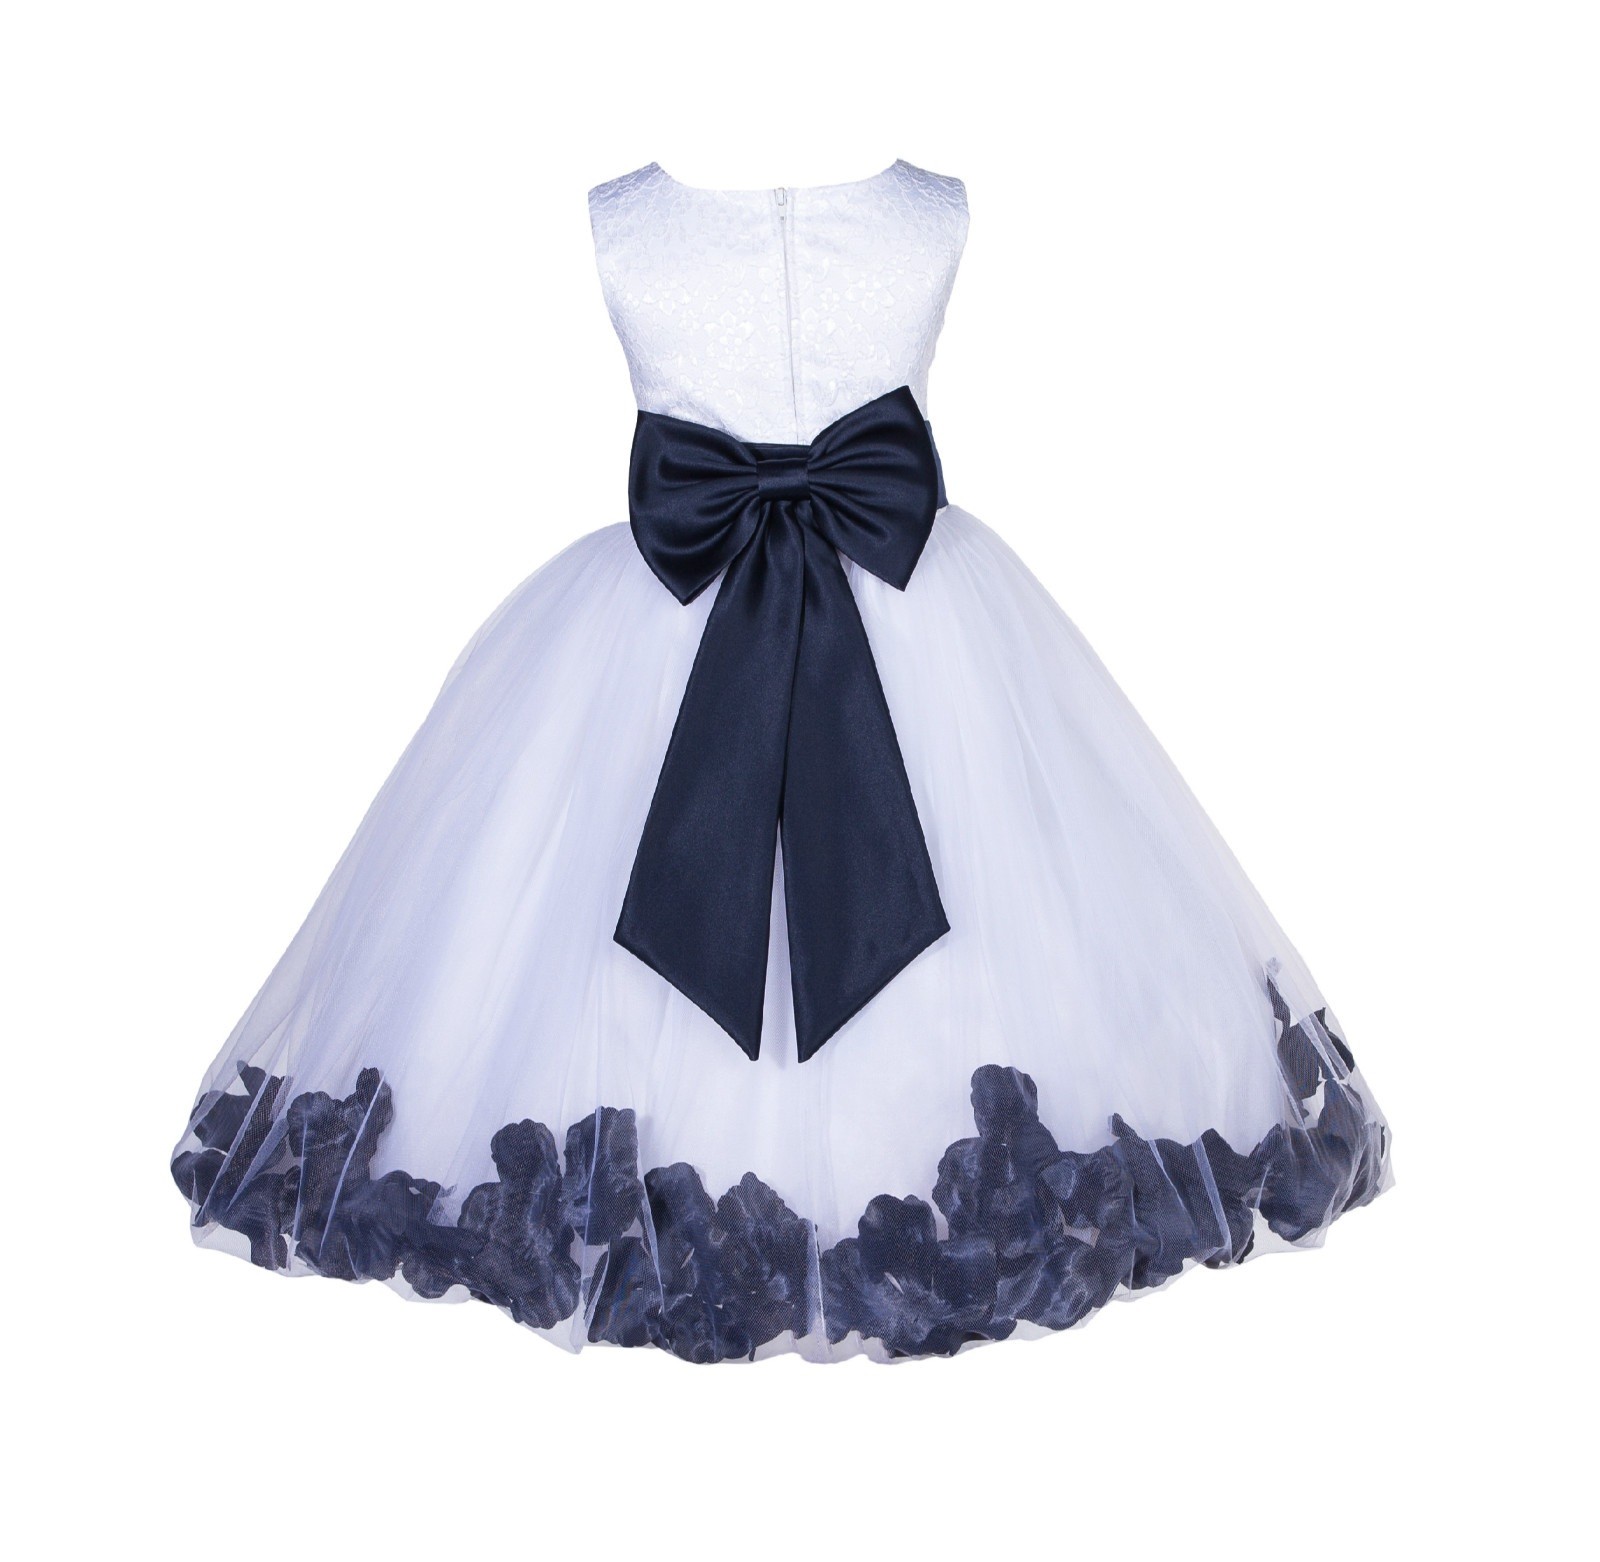 White/Midnight Lace Top Tulle Floral Petals Flower Girl Dress 165T